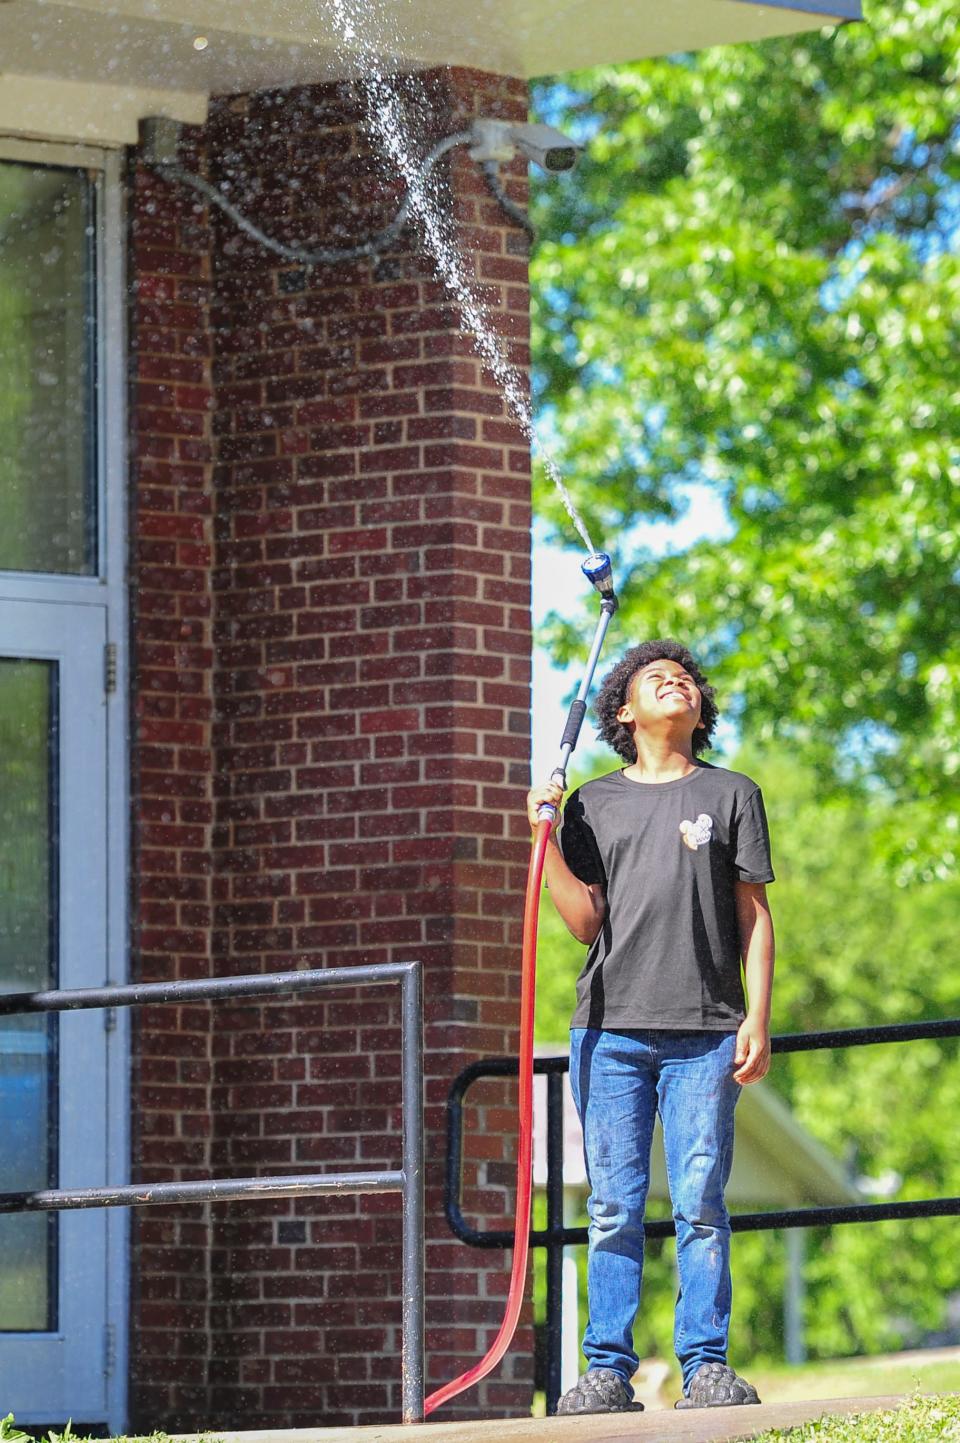 Sixth grader Deondre Jacobs plays with the hose after school in garden club at Vine Middle School on Wednesday, May 1, 2024.